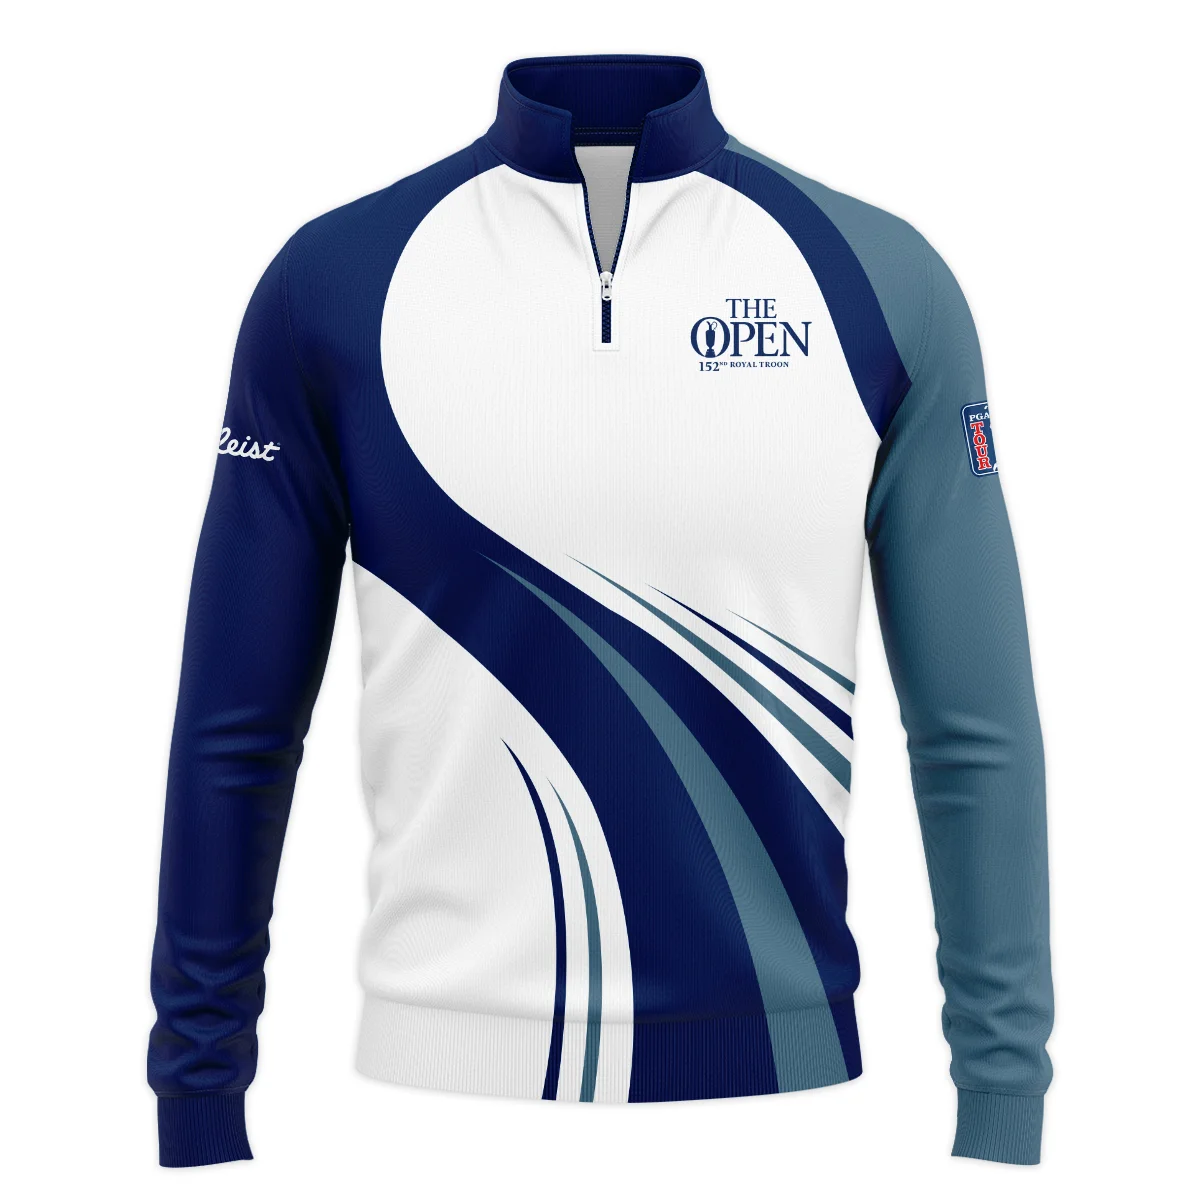 152nd Open Championship Titleist White Mostly Desaturated Dark Blue Quarter-Zip Jacket All Over Prints HOTOP270624A02TLSWZ